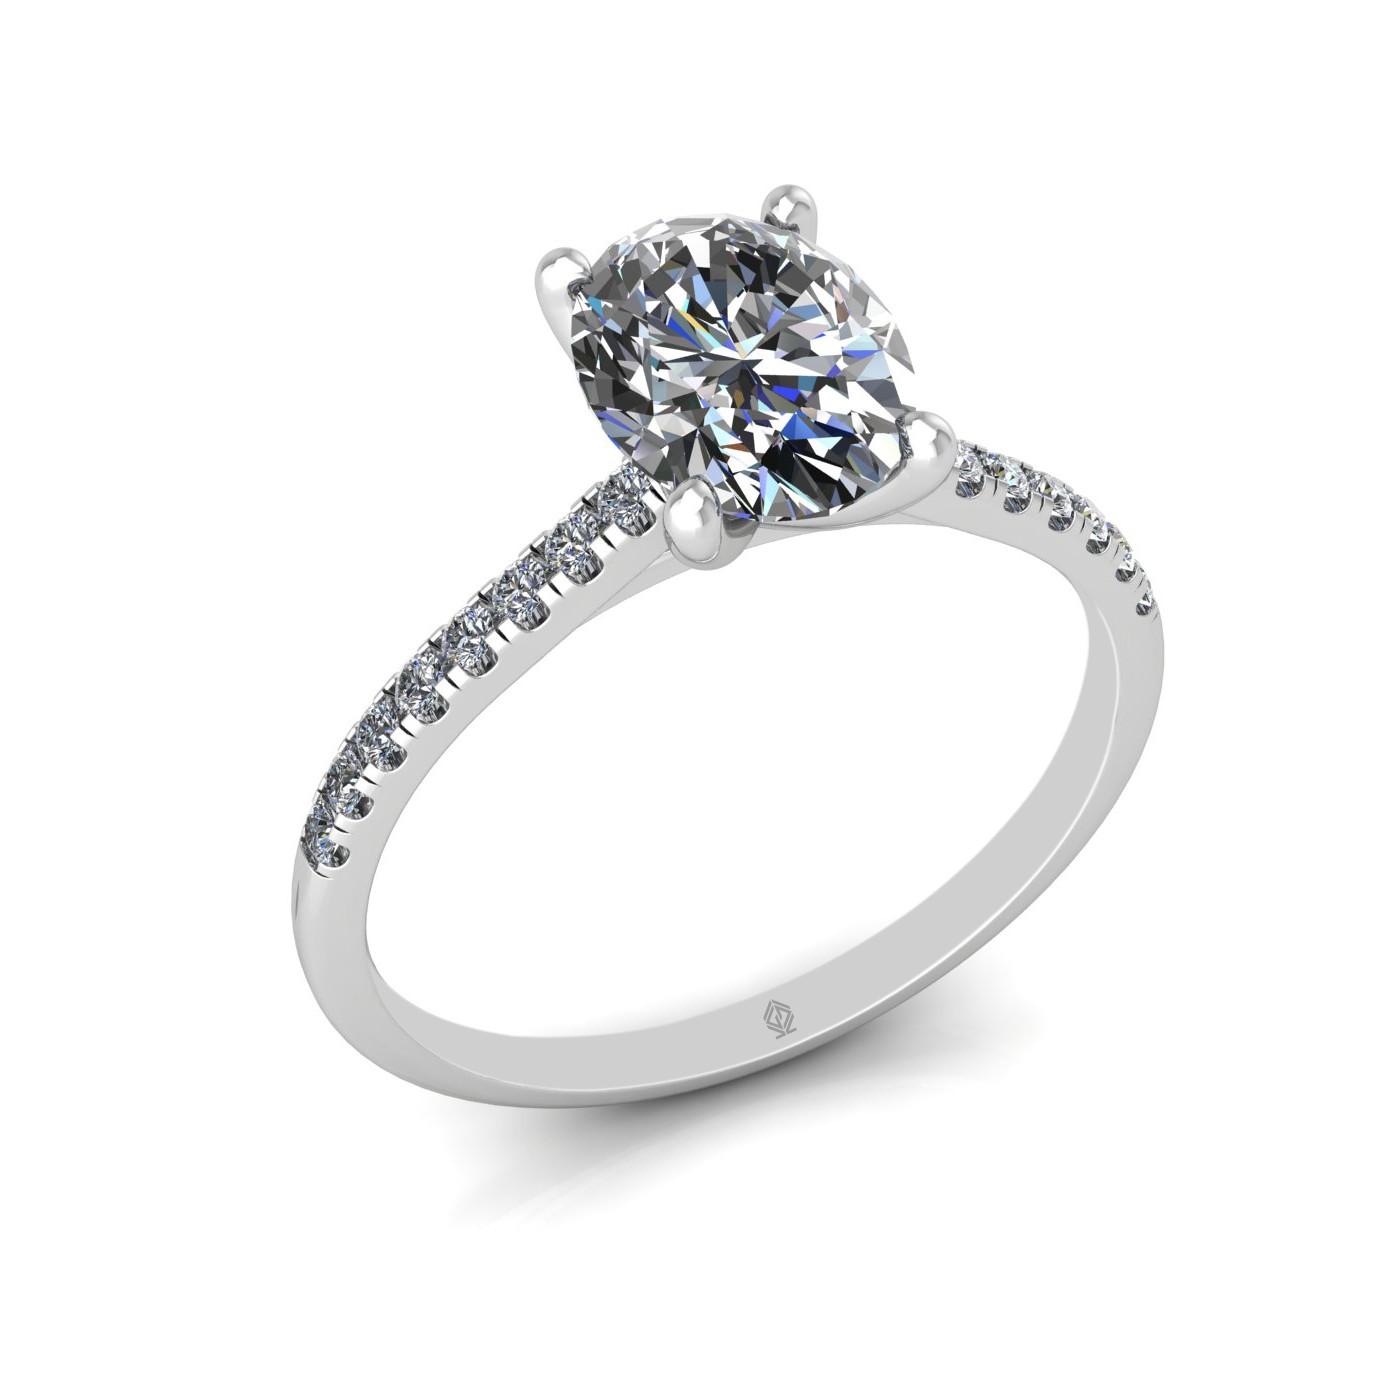 18k white gold  1,20 ct 4 prongs oval cut diamond engagement ring with whisper thin pavÉ set band